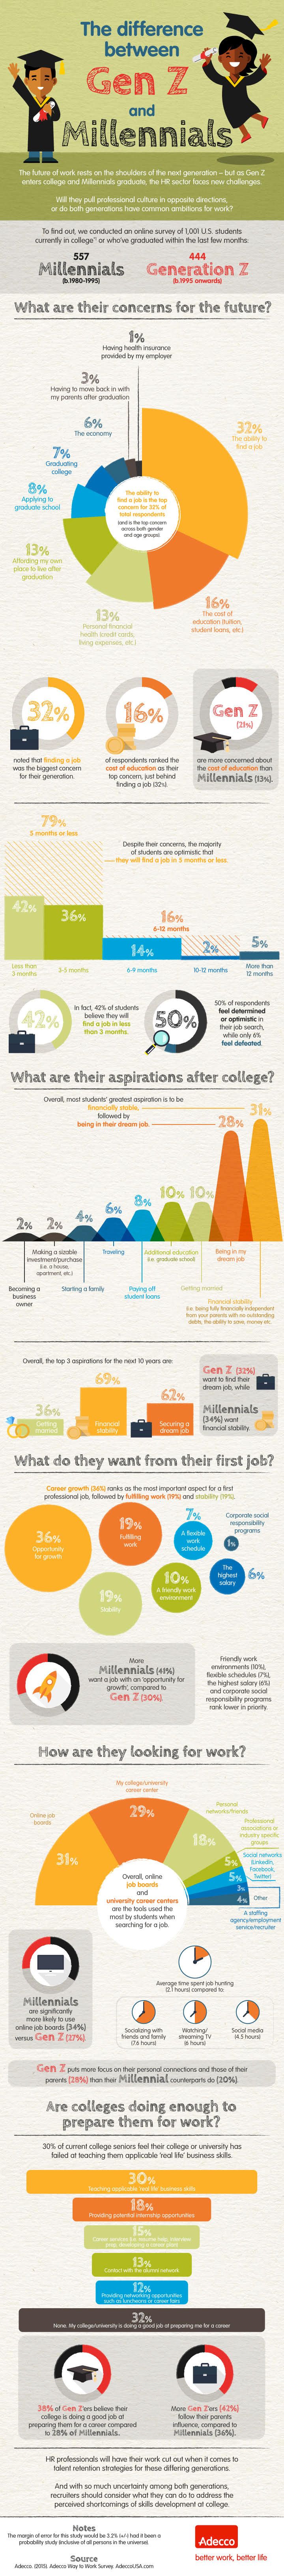 The Future of Work in the Eyes of Gen Z and Millennials [Infographic]